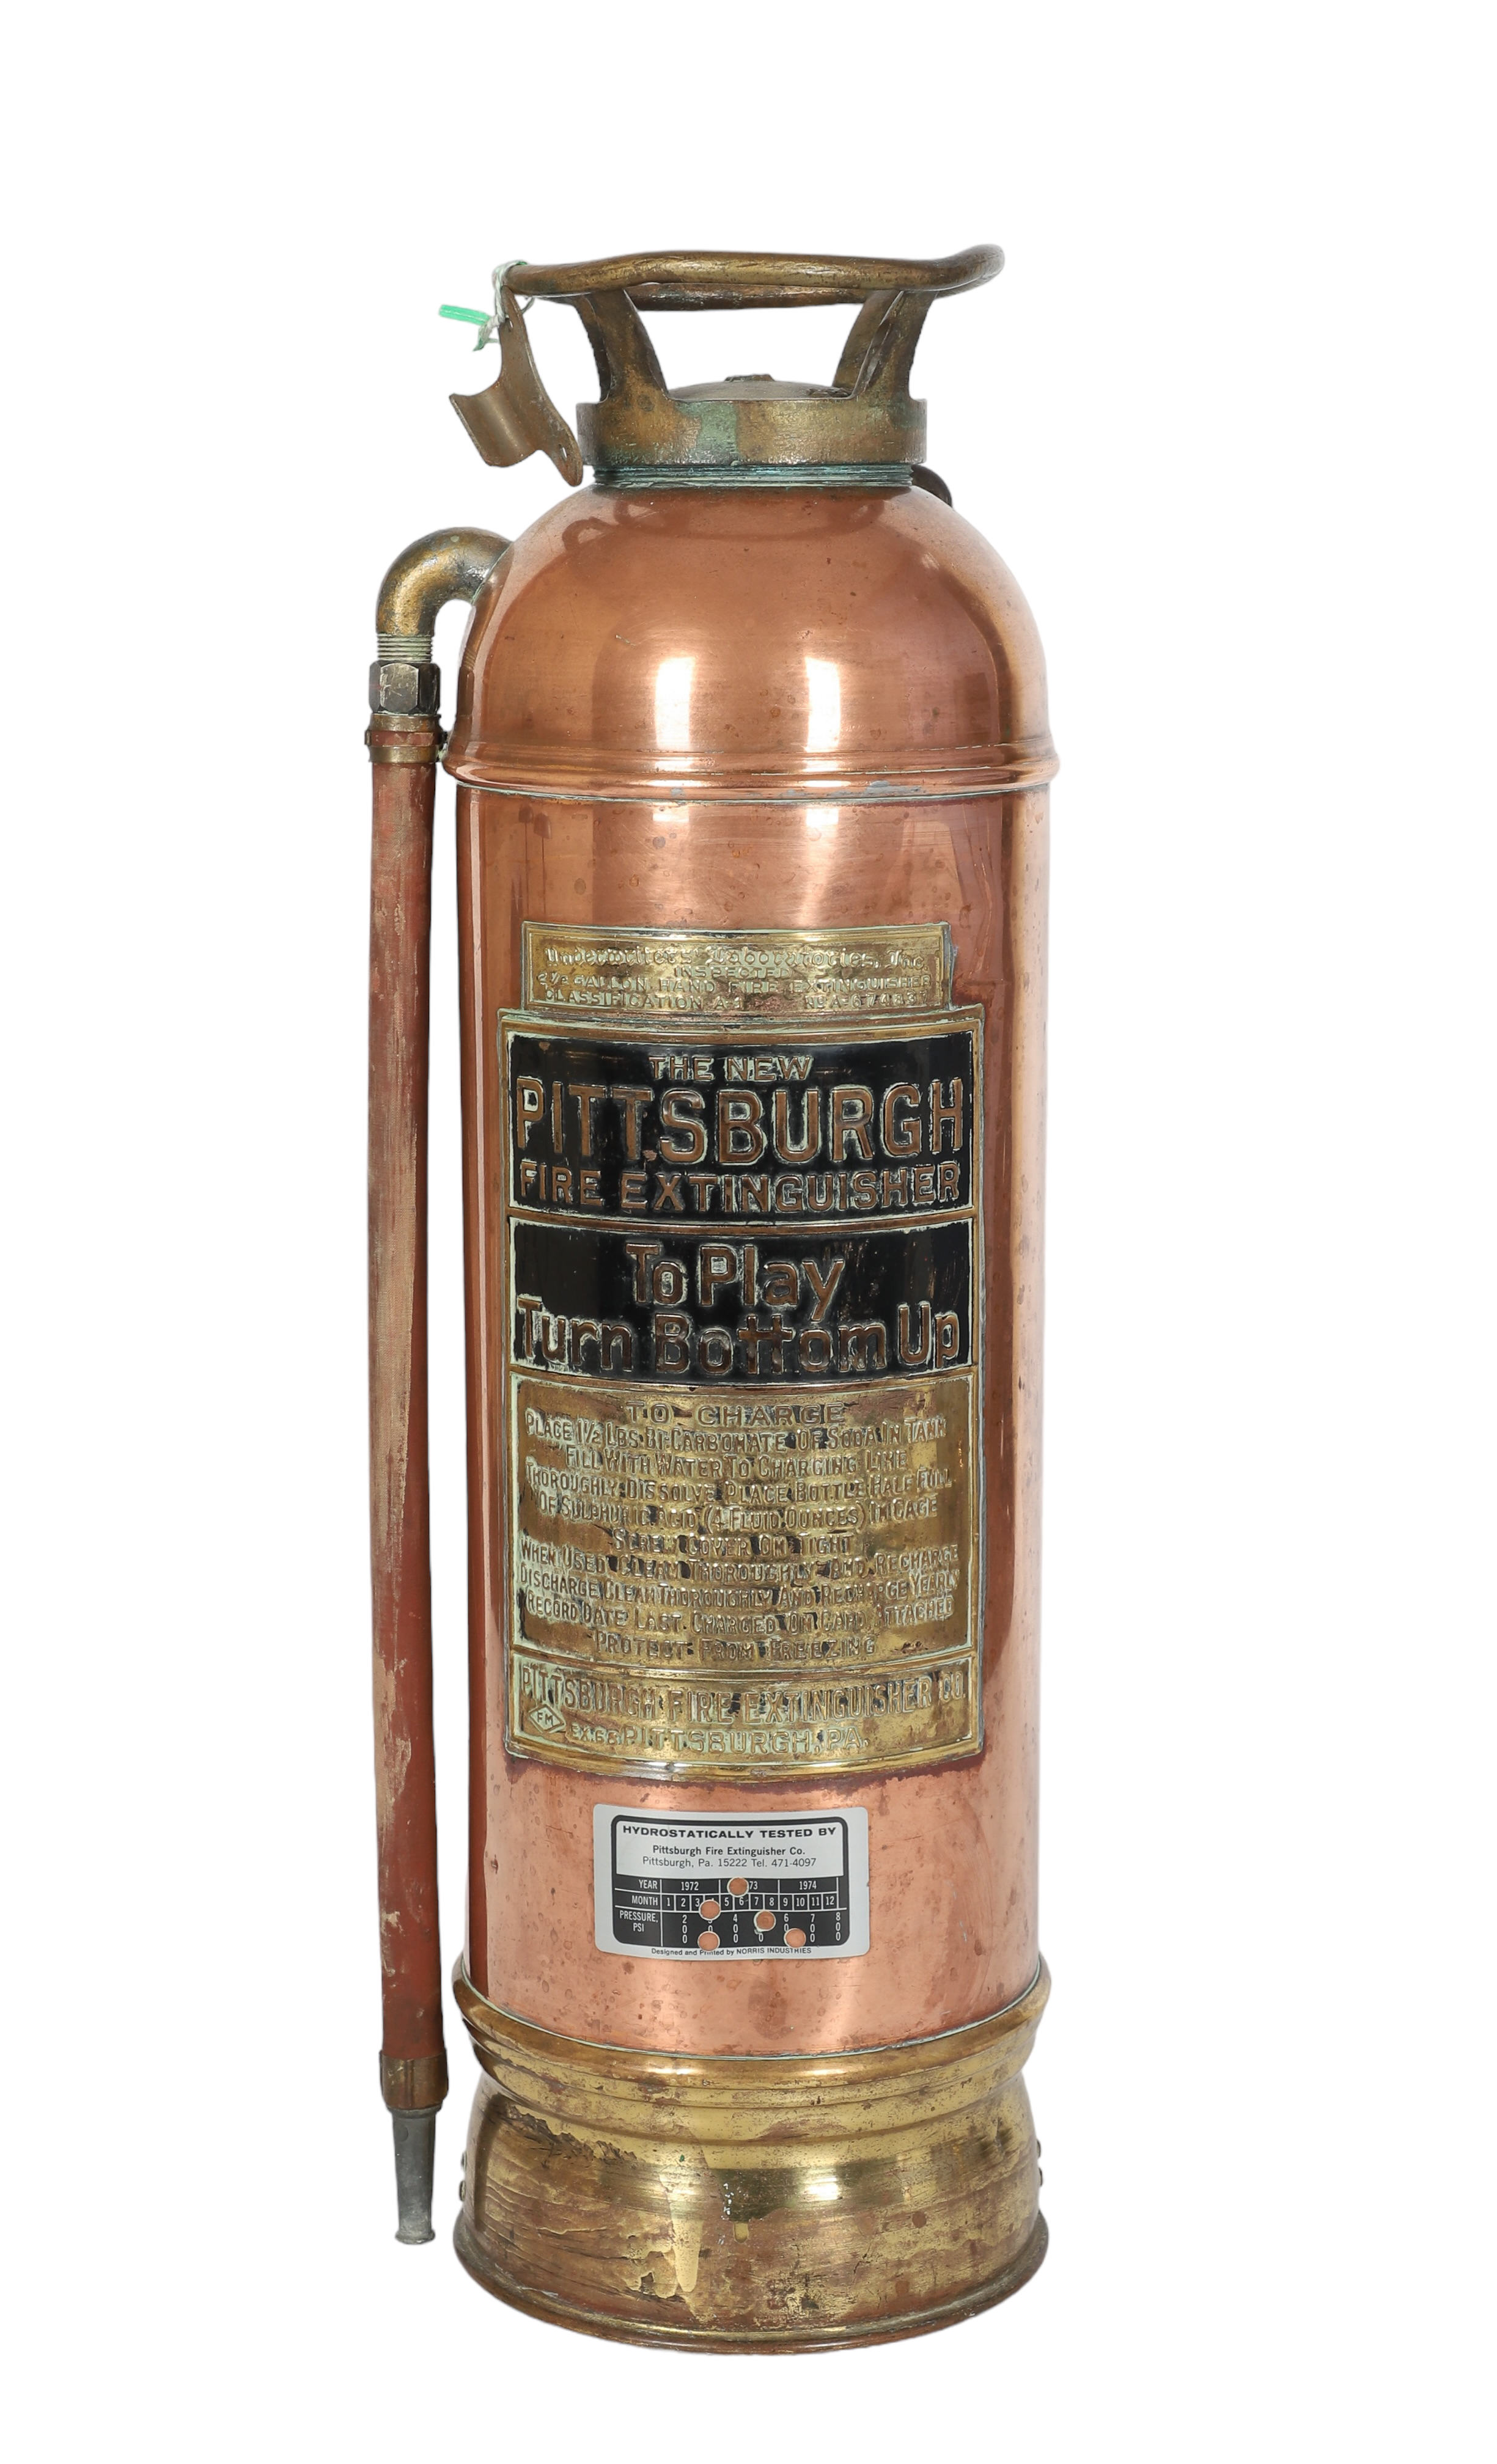 Pittsburgh Fire Extinguisher copper 3b3bc9